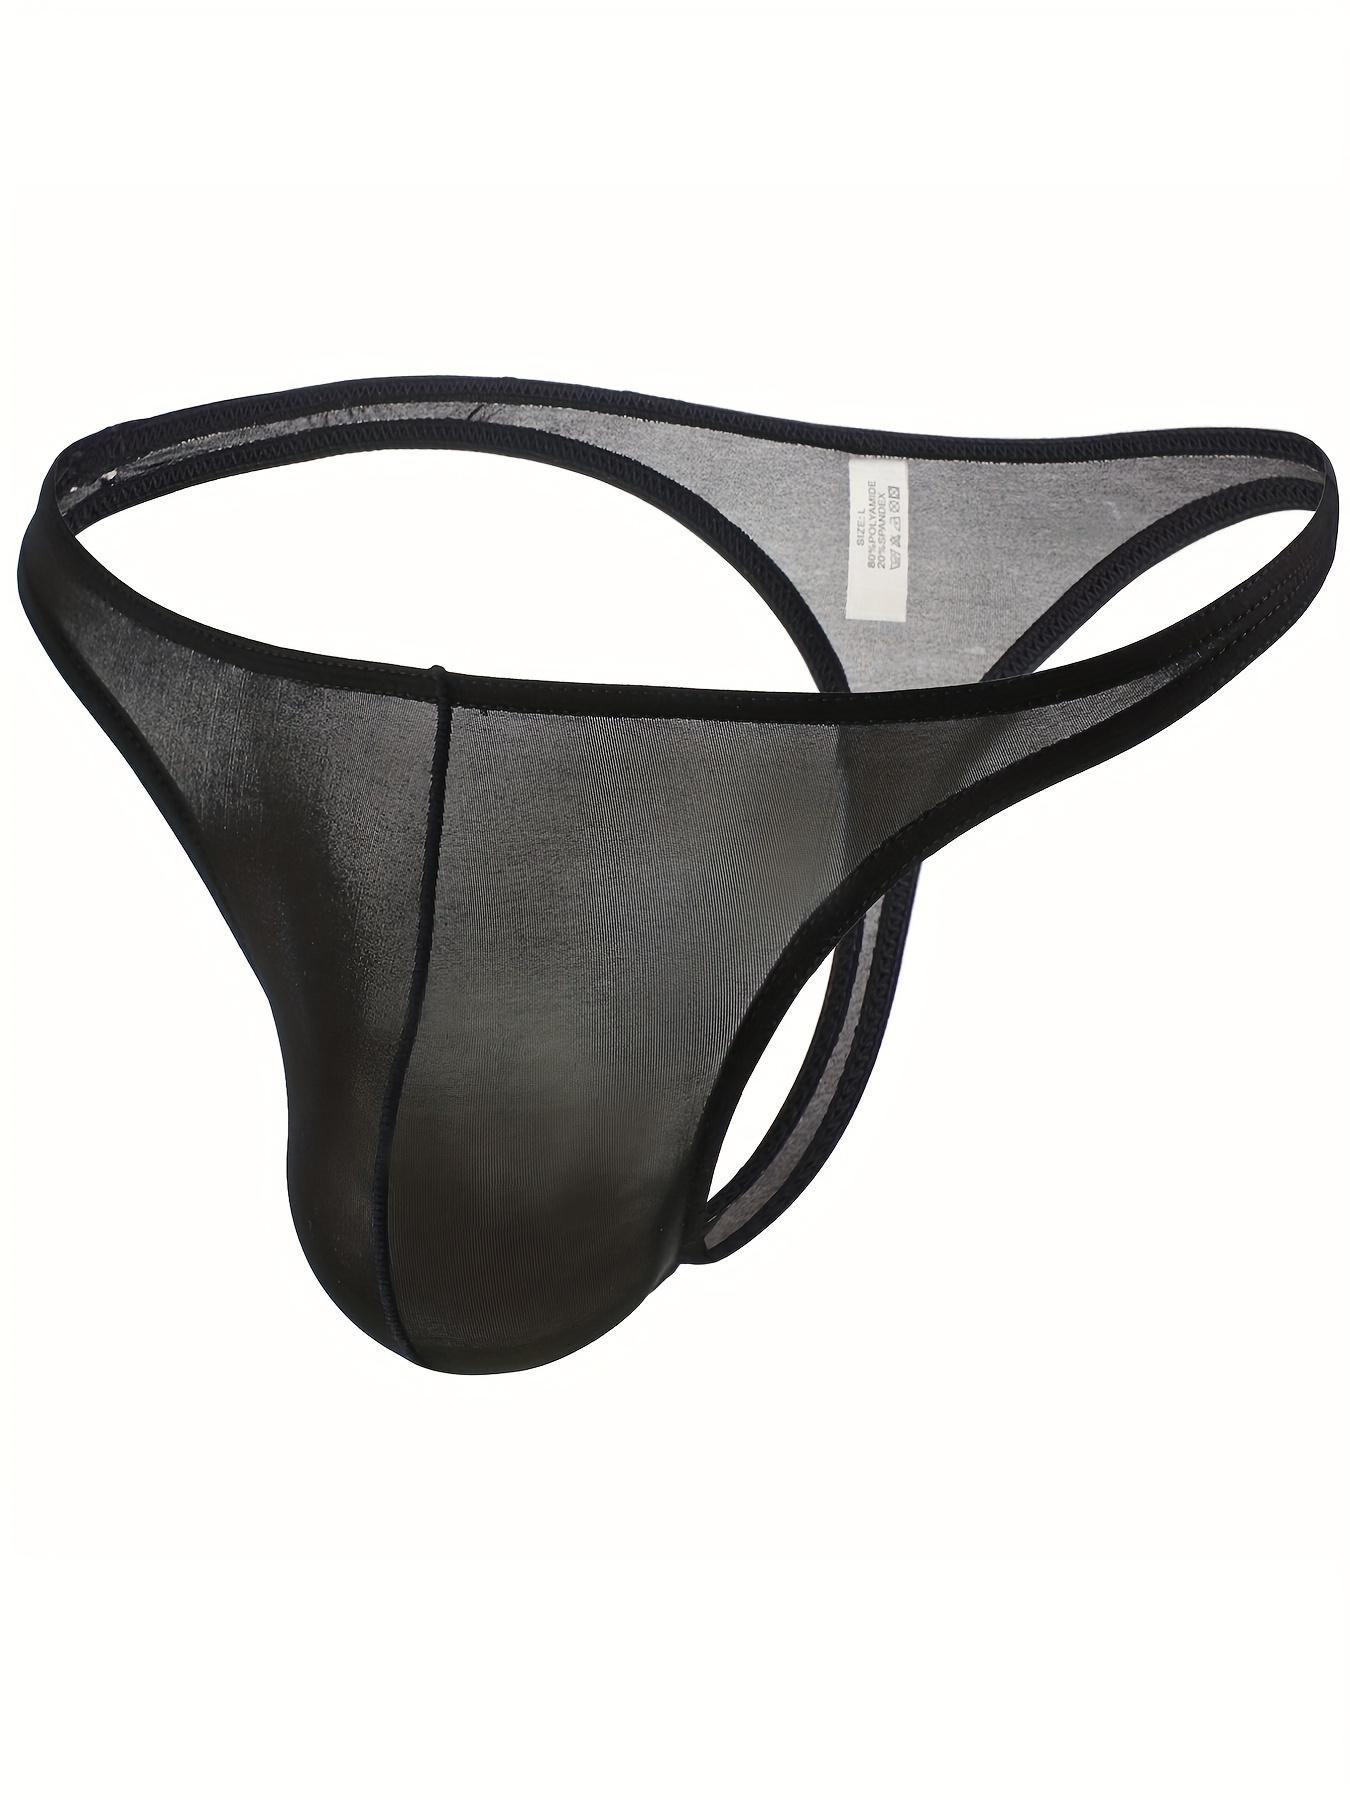 2/pack Mens Elastic C String Thong Underwear Invisible Panties White Black  [free Shipping]